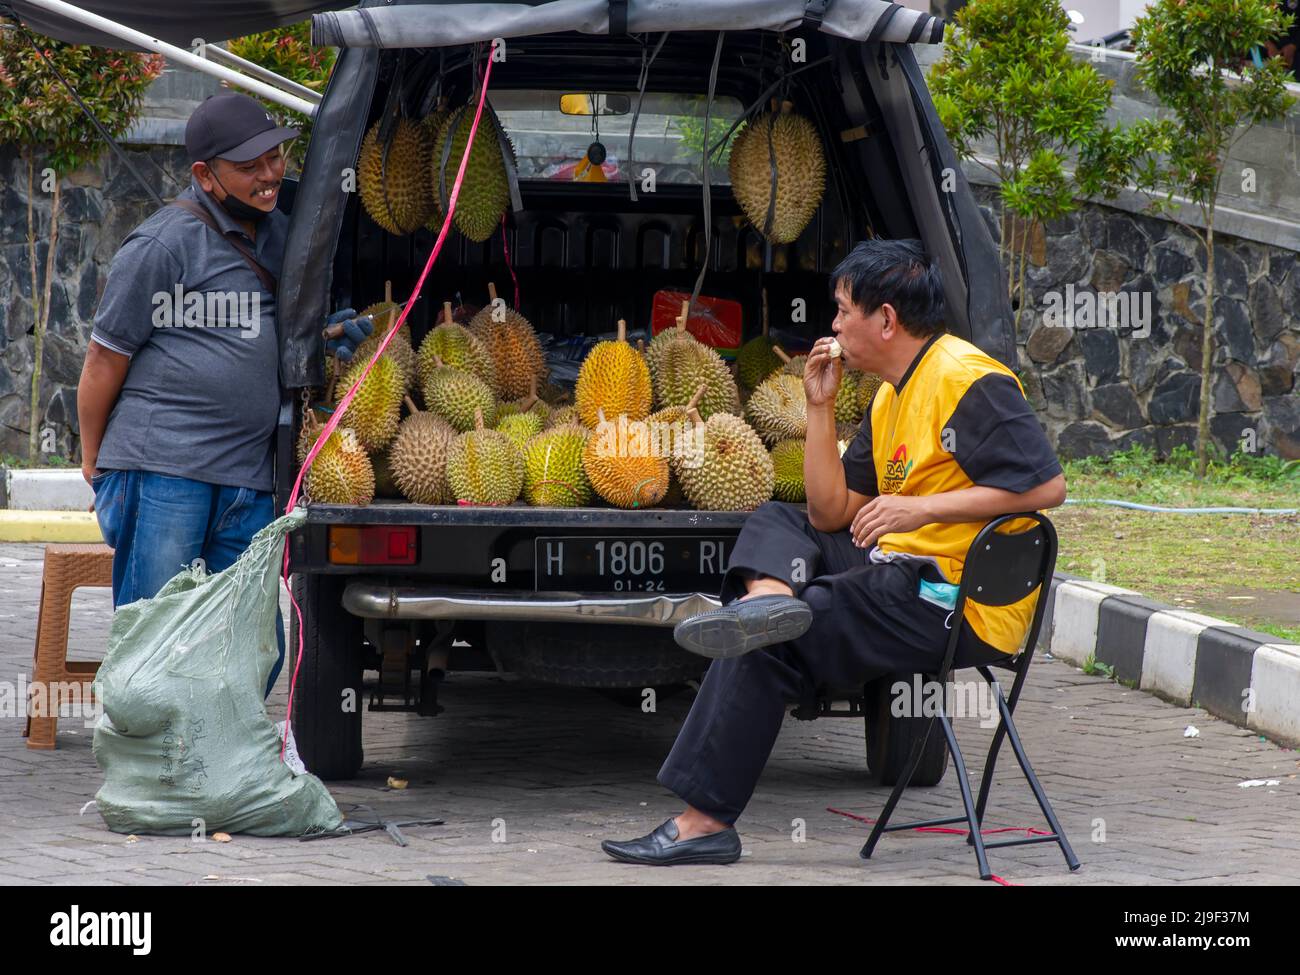 Semarang, Indonesia - January 12, 2022: A durian fruit seller and buyer in front of the delicious ripe durians Stock Photo